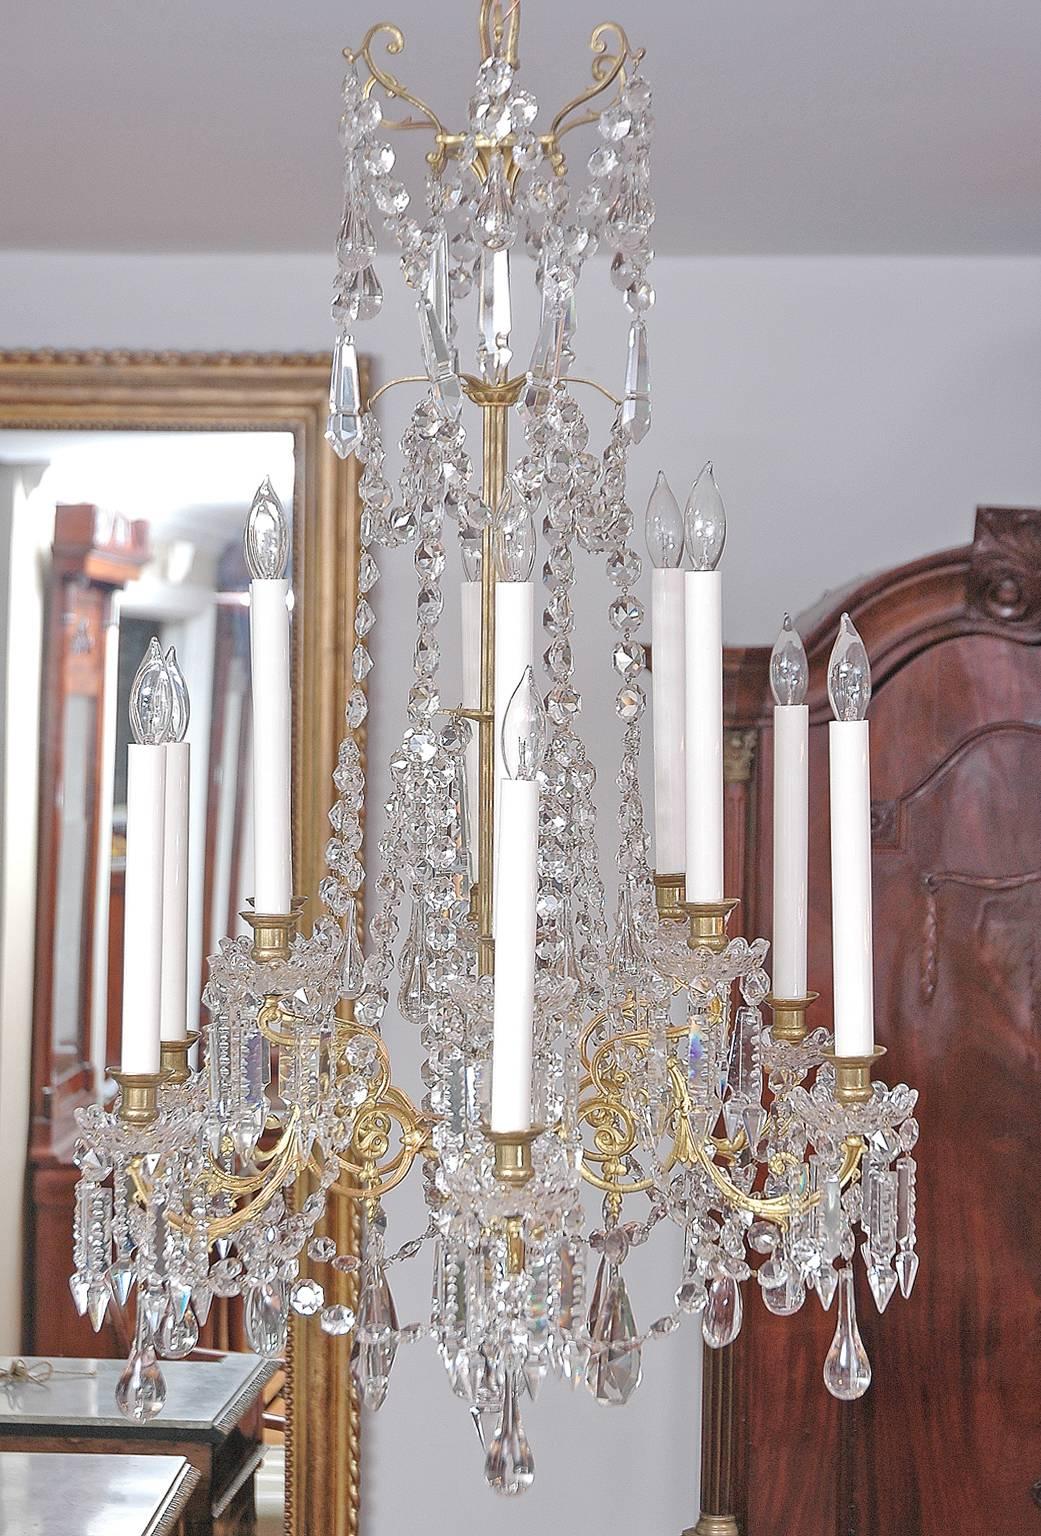 Exceptional Swedish cut-glass and crystal chandelier fabricated during the reign of King Oskar II of Sweden and Norway. (21 January 1829 – 8 December 1907).
This chandelier features twelve lights electrified to US standers. It can be illuminated